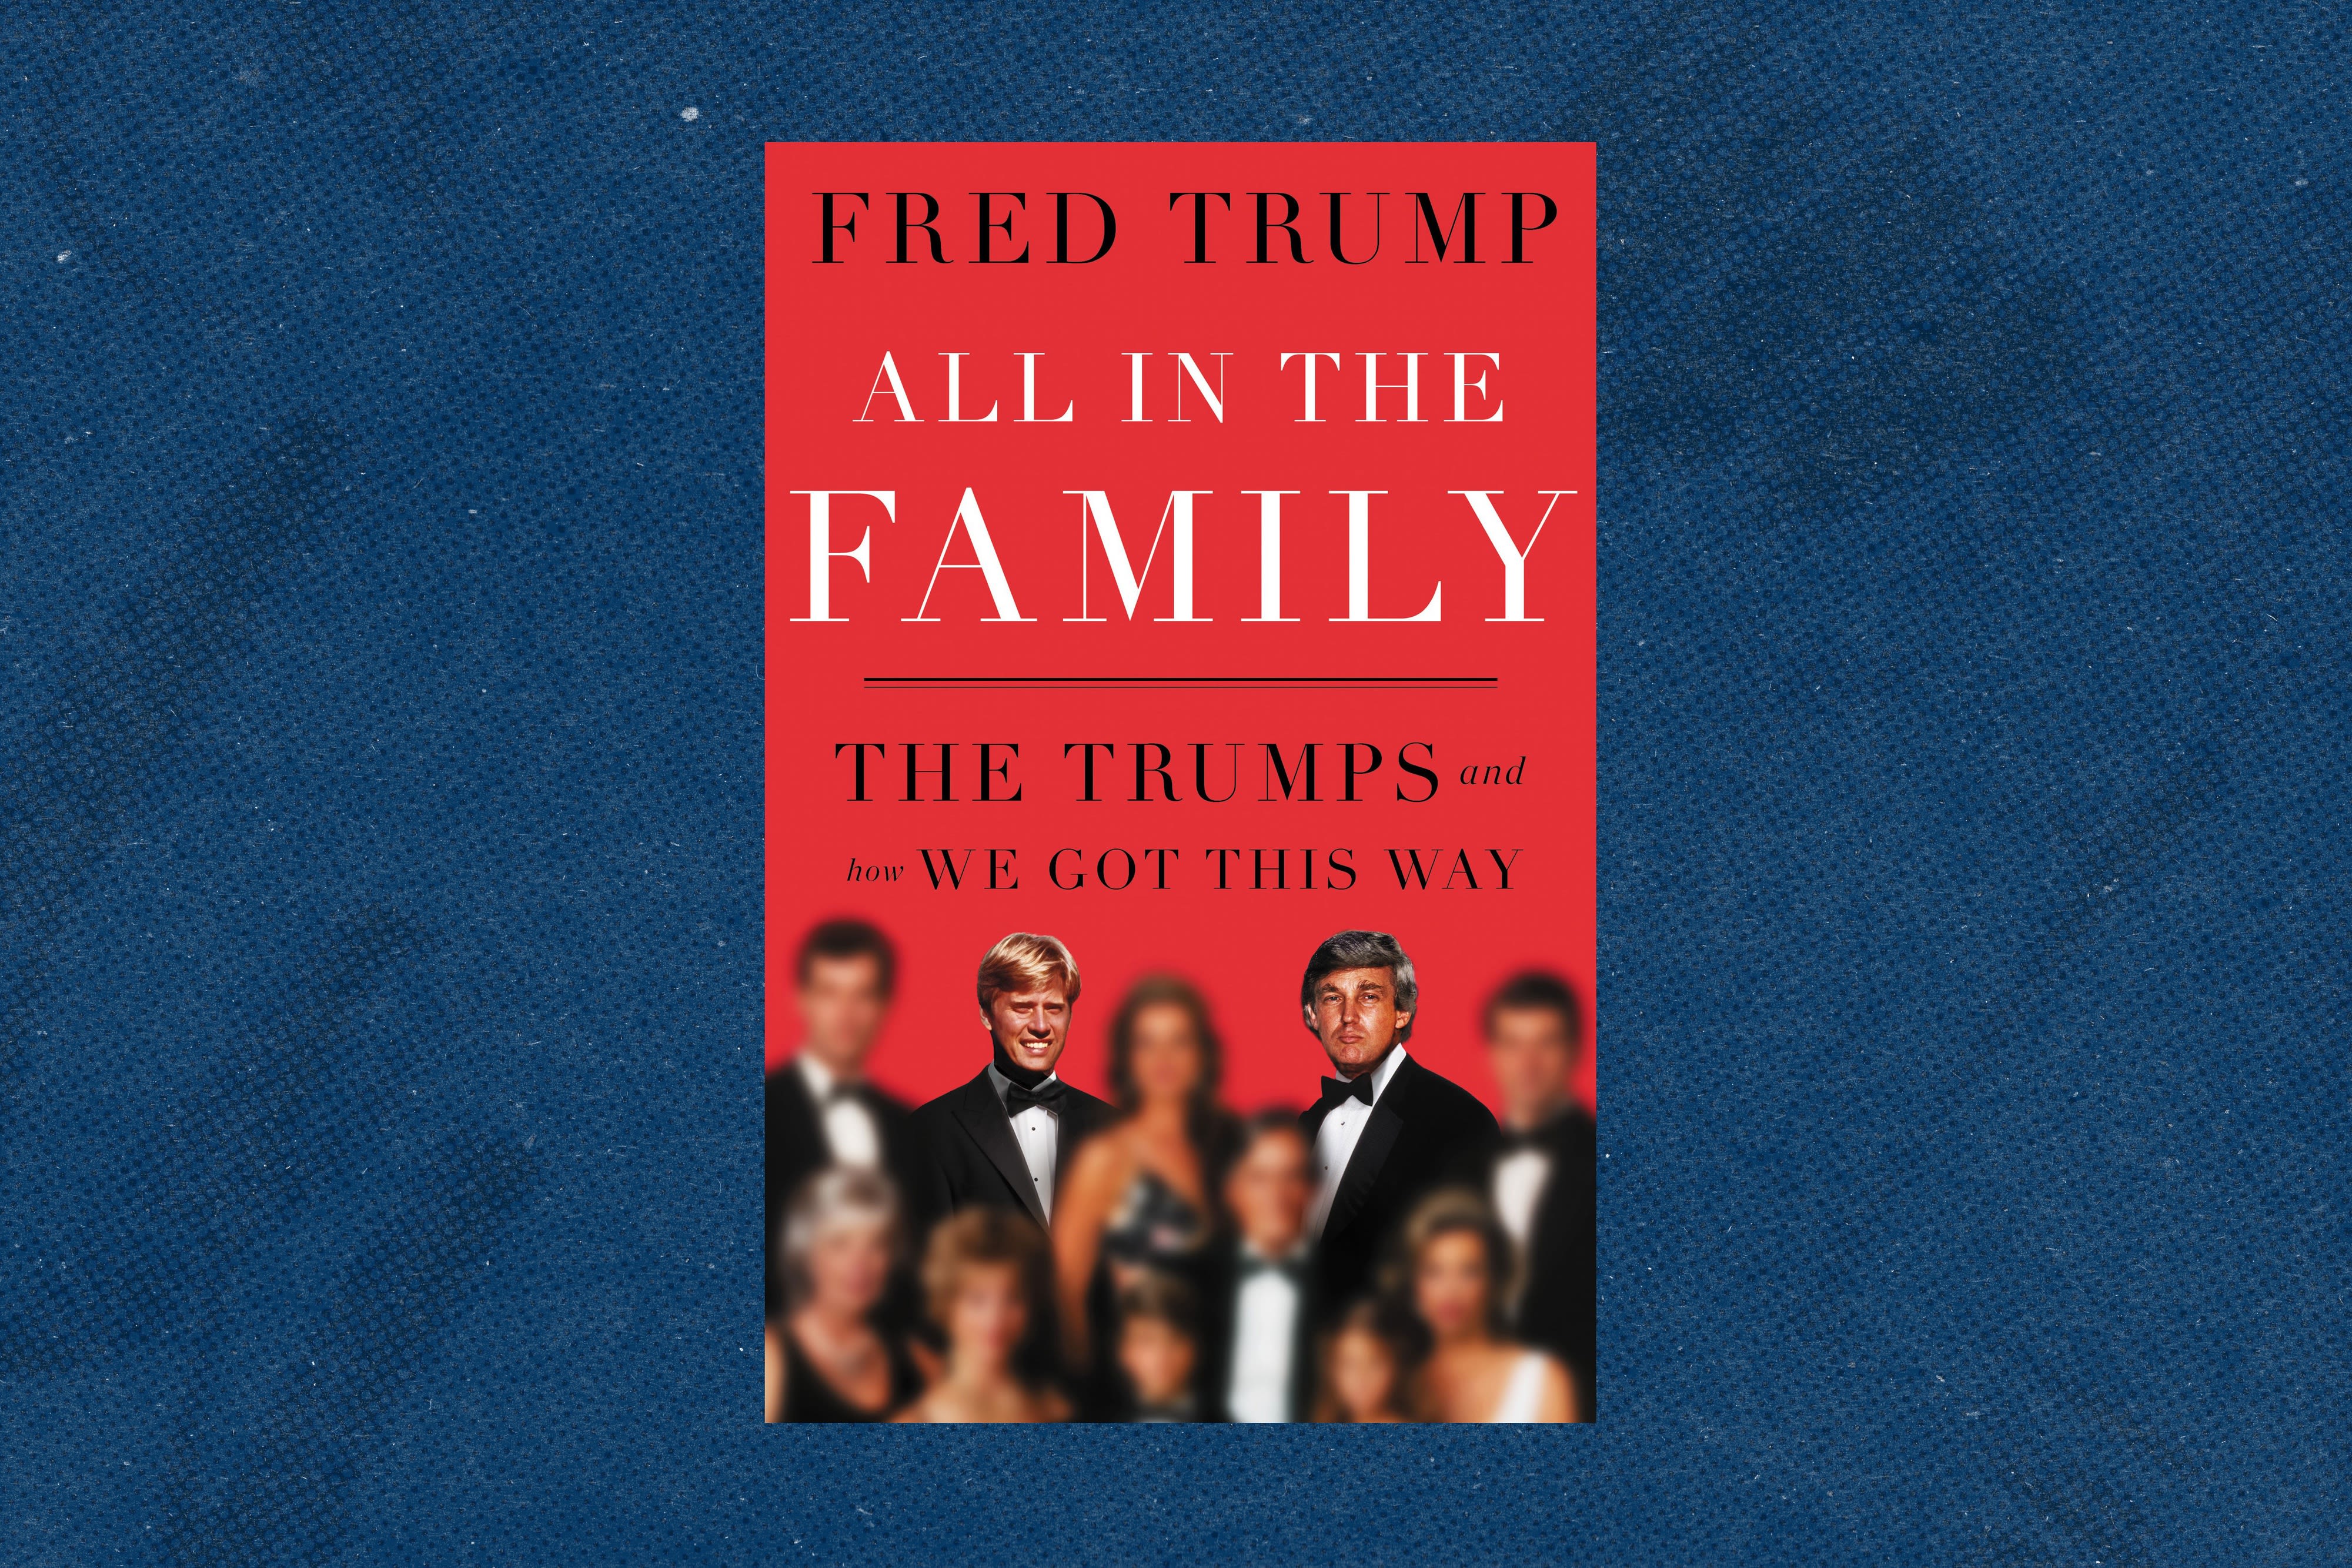 Review | Donald Trump’s nephew asks questions about racism in new memoir